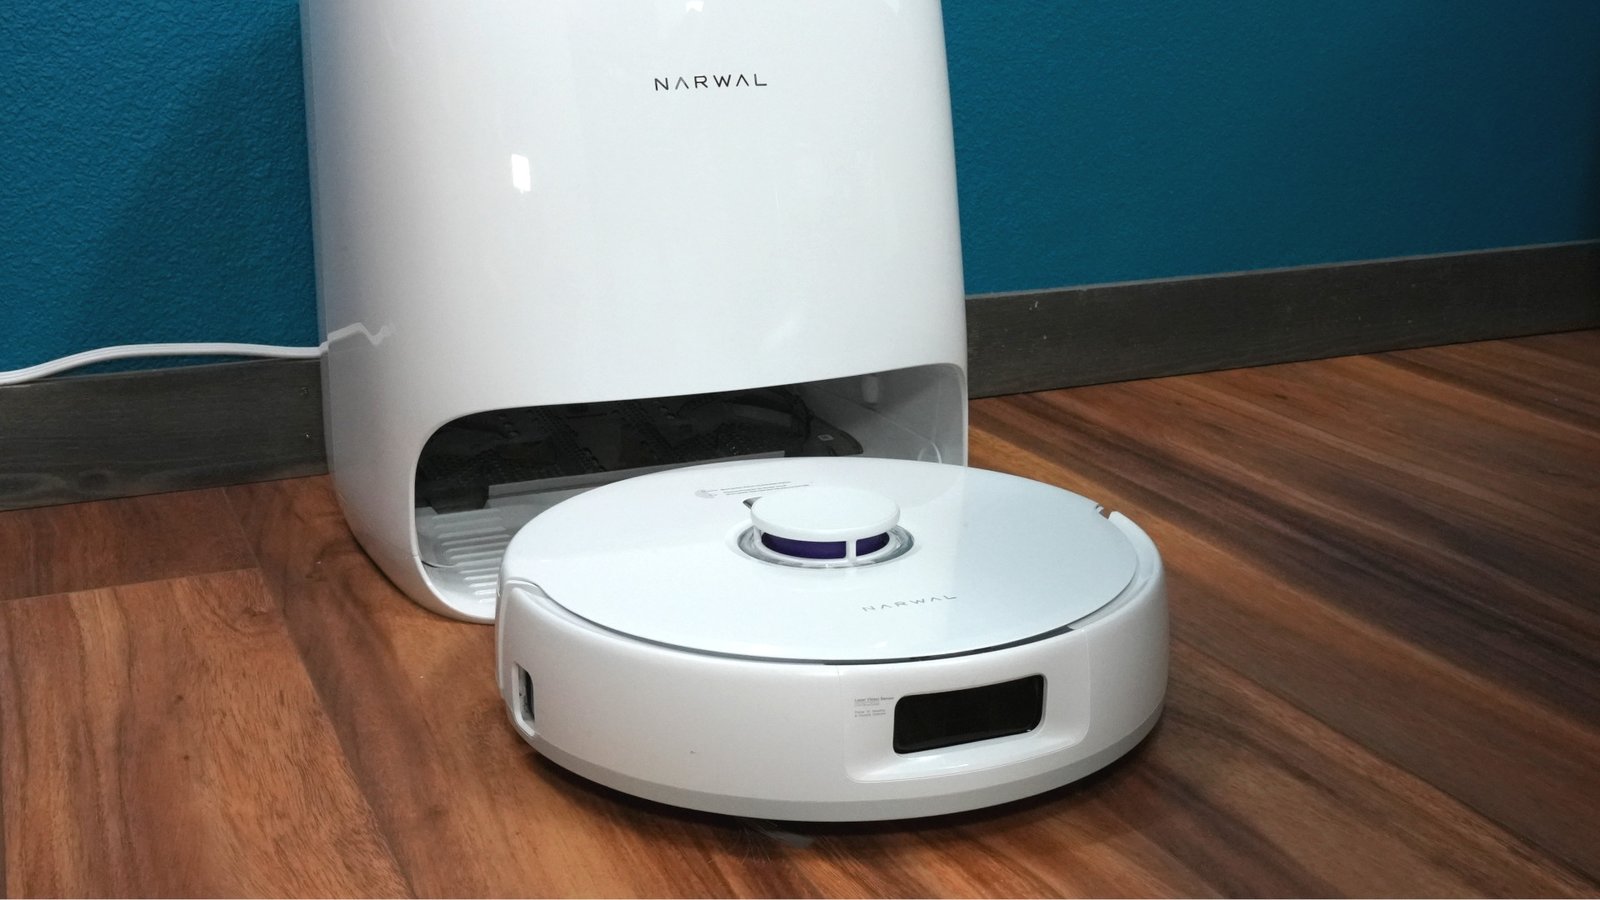 Narwal Freo X Ultra review: Powerful and reliable floor cleaning